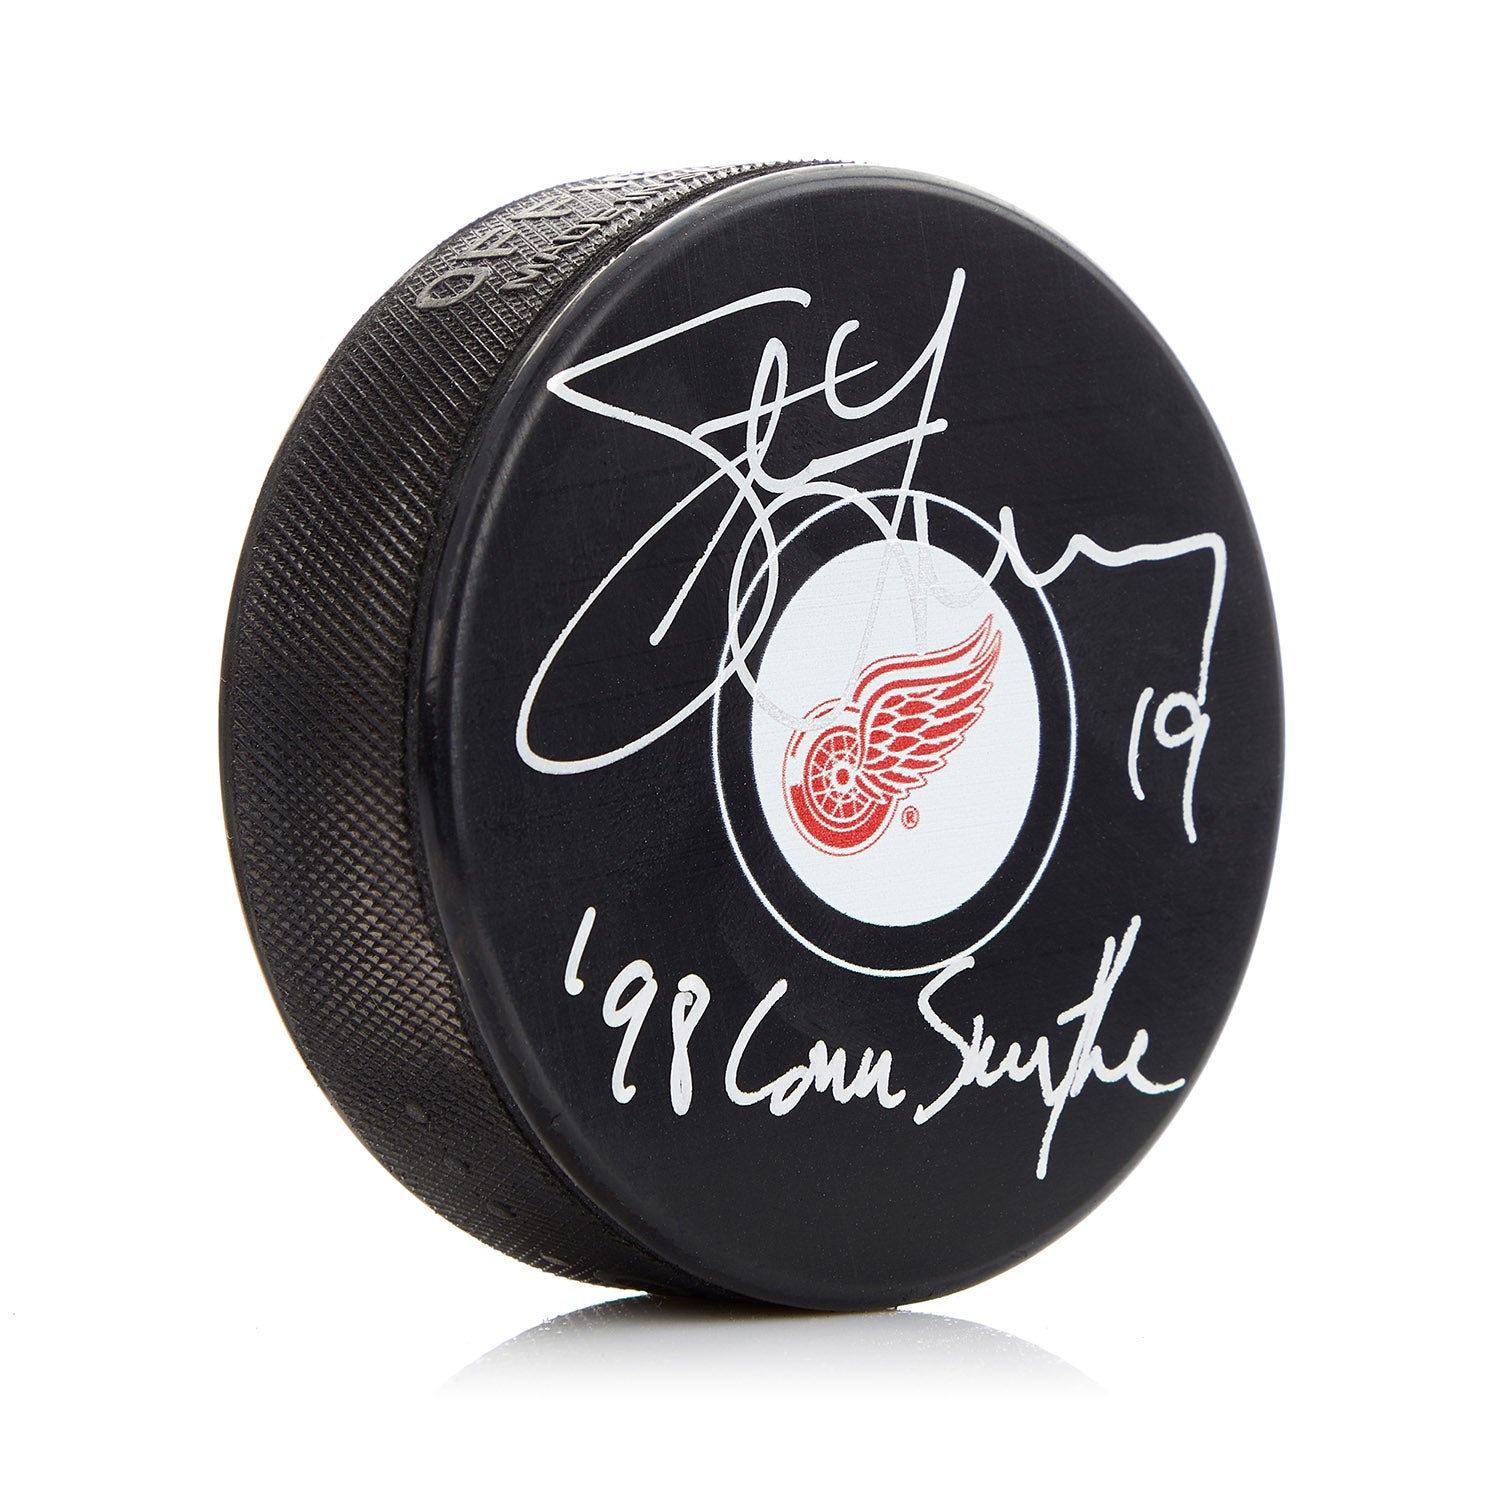 Steve Yzerman Signed Detroit Red Wings Puck with 98 Conn Smythe Note